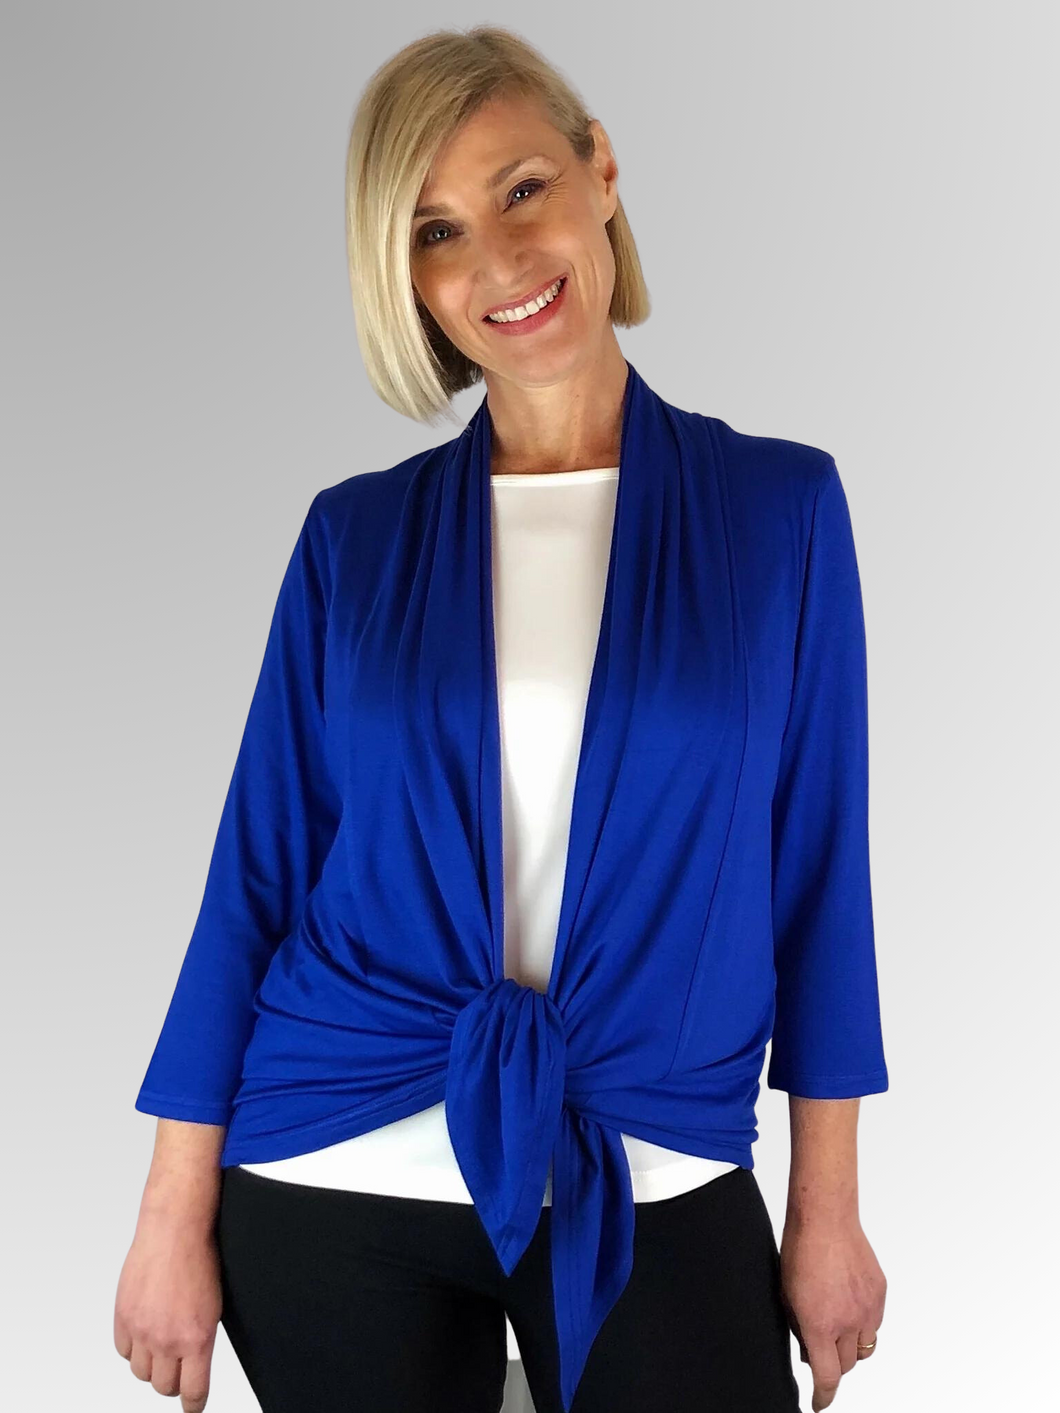 Our Bamboo Cardi is made from 95% Bamboo and 5% Spandex making it super light and silky soft. Being a breathable fabric it draws moisture away from your body keeping you cool. Available in a range of beautiful colours, you'll buy one and come back for more. Best of all, they’re 